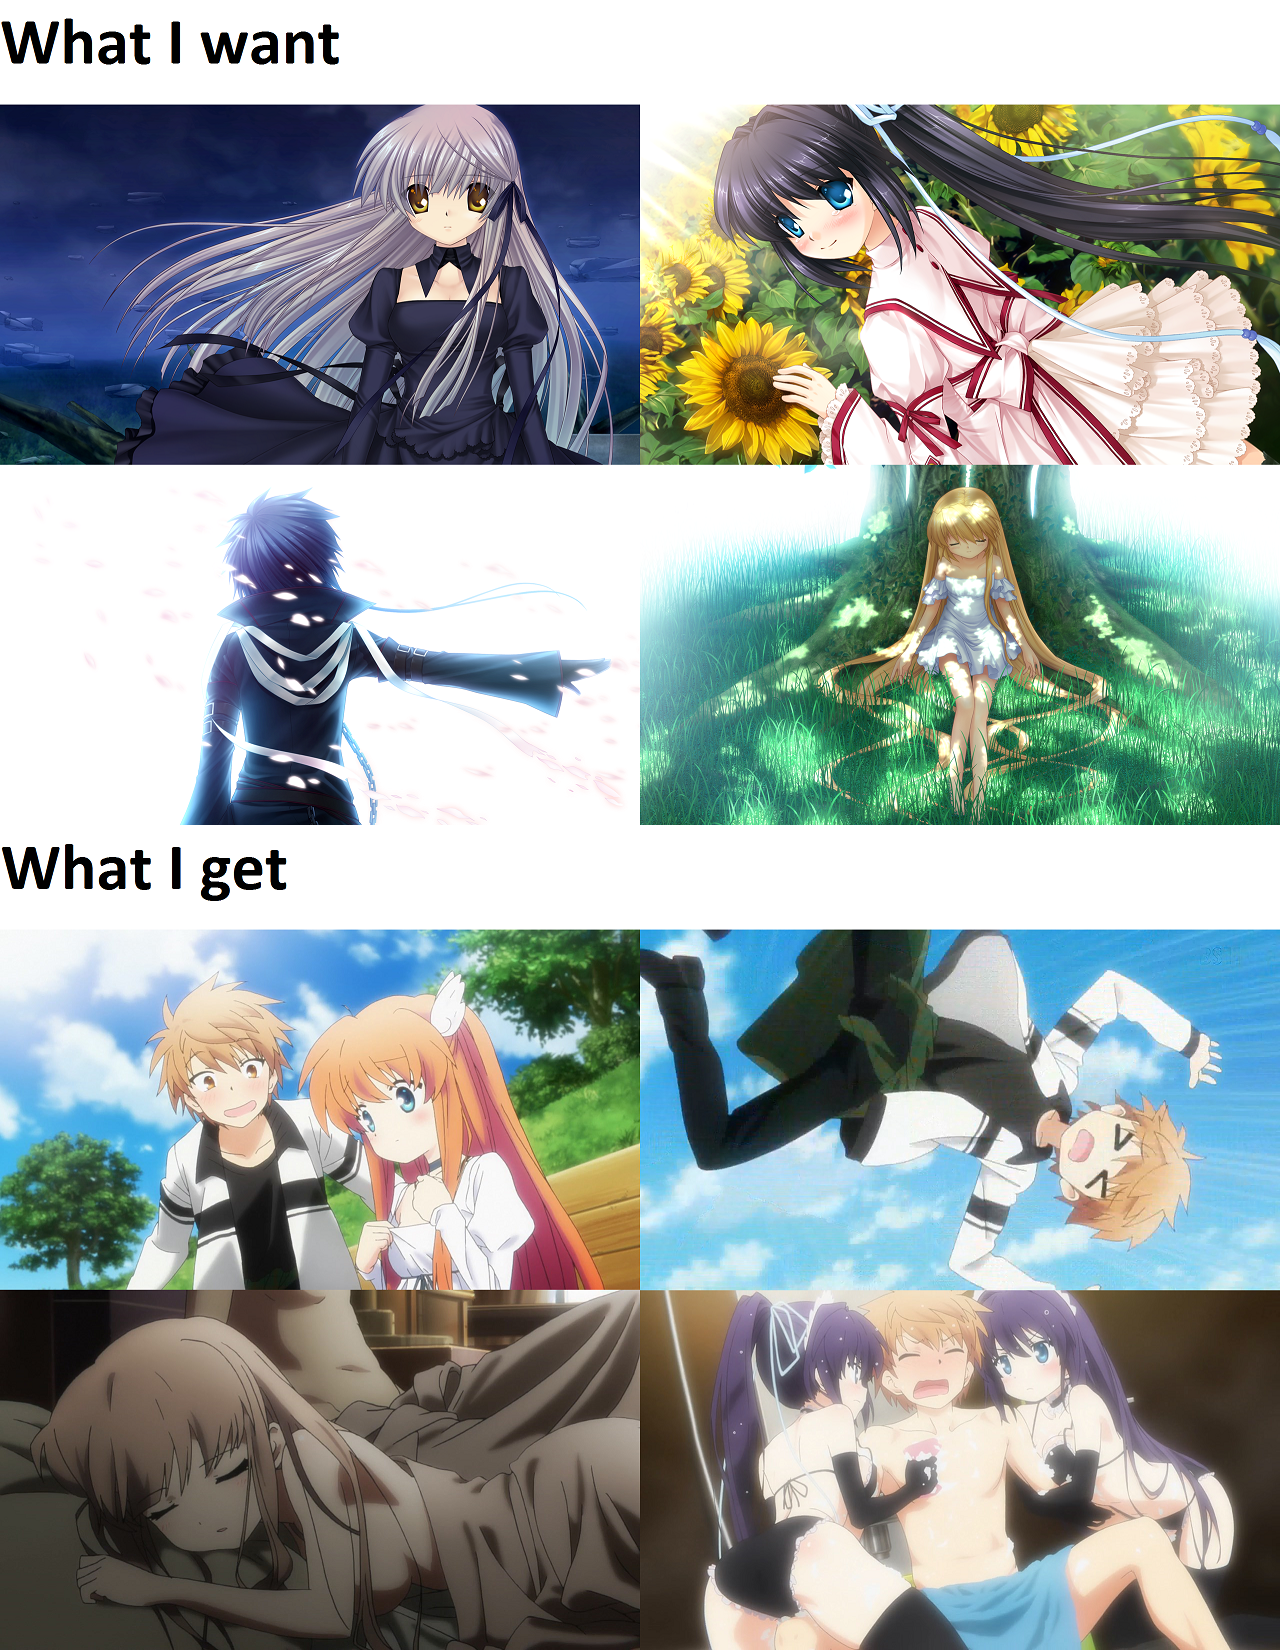 Rewrite 2nd Season Episode 1 Discussion - Forums 